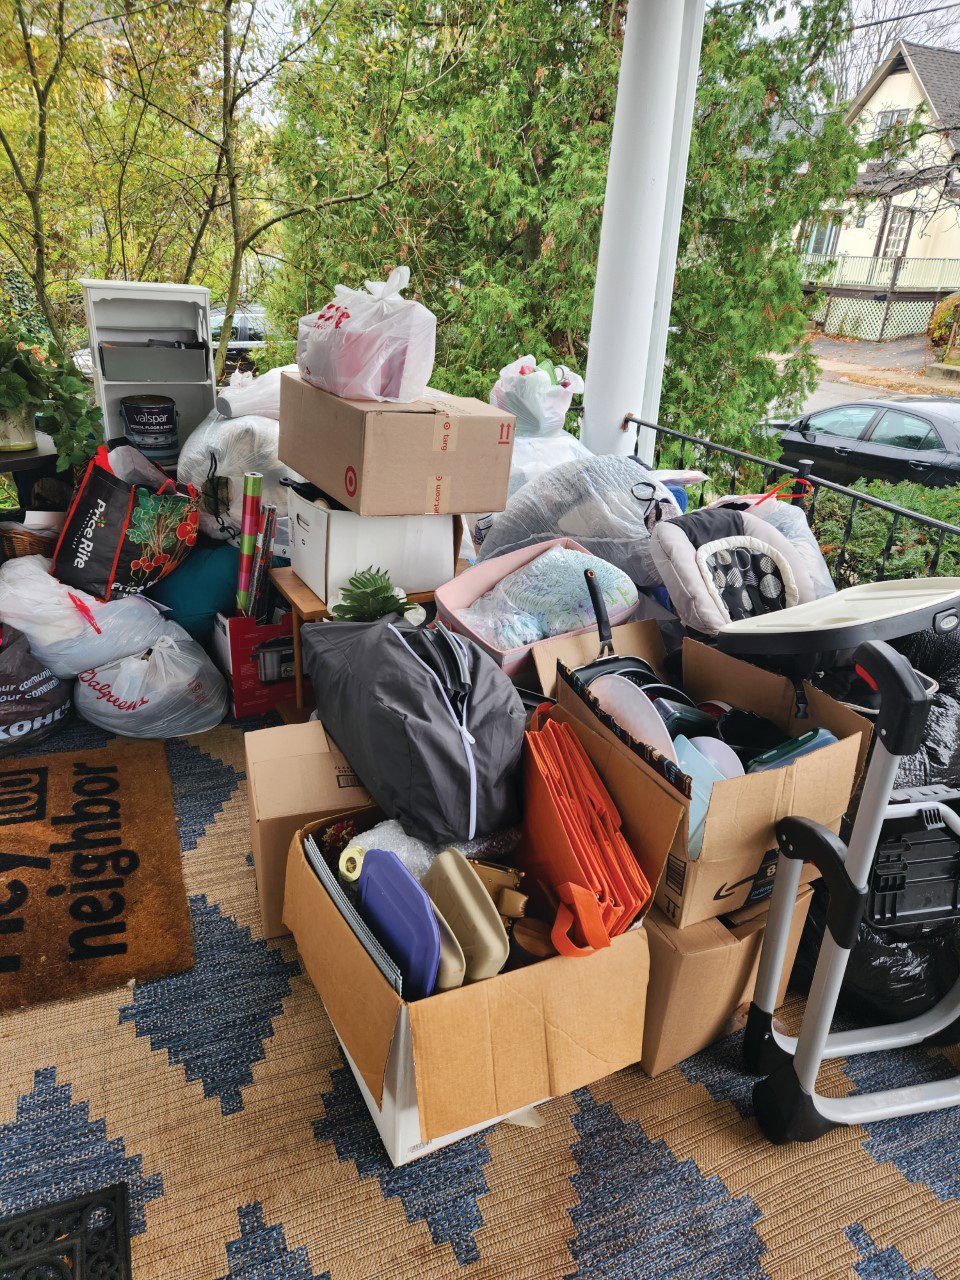 PILES OF DONTATIONS: Edgewood resident Shawn O’Rourke’s porch is loaded with bags of groceries, clothing, toys, furniture and anything that is of need to help people get by.